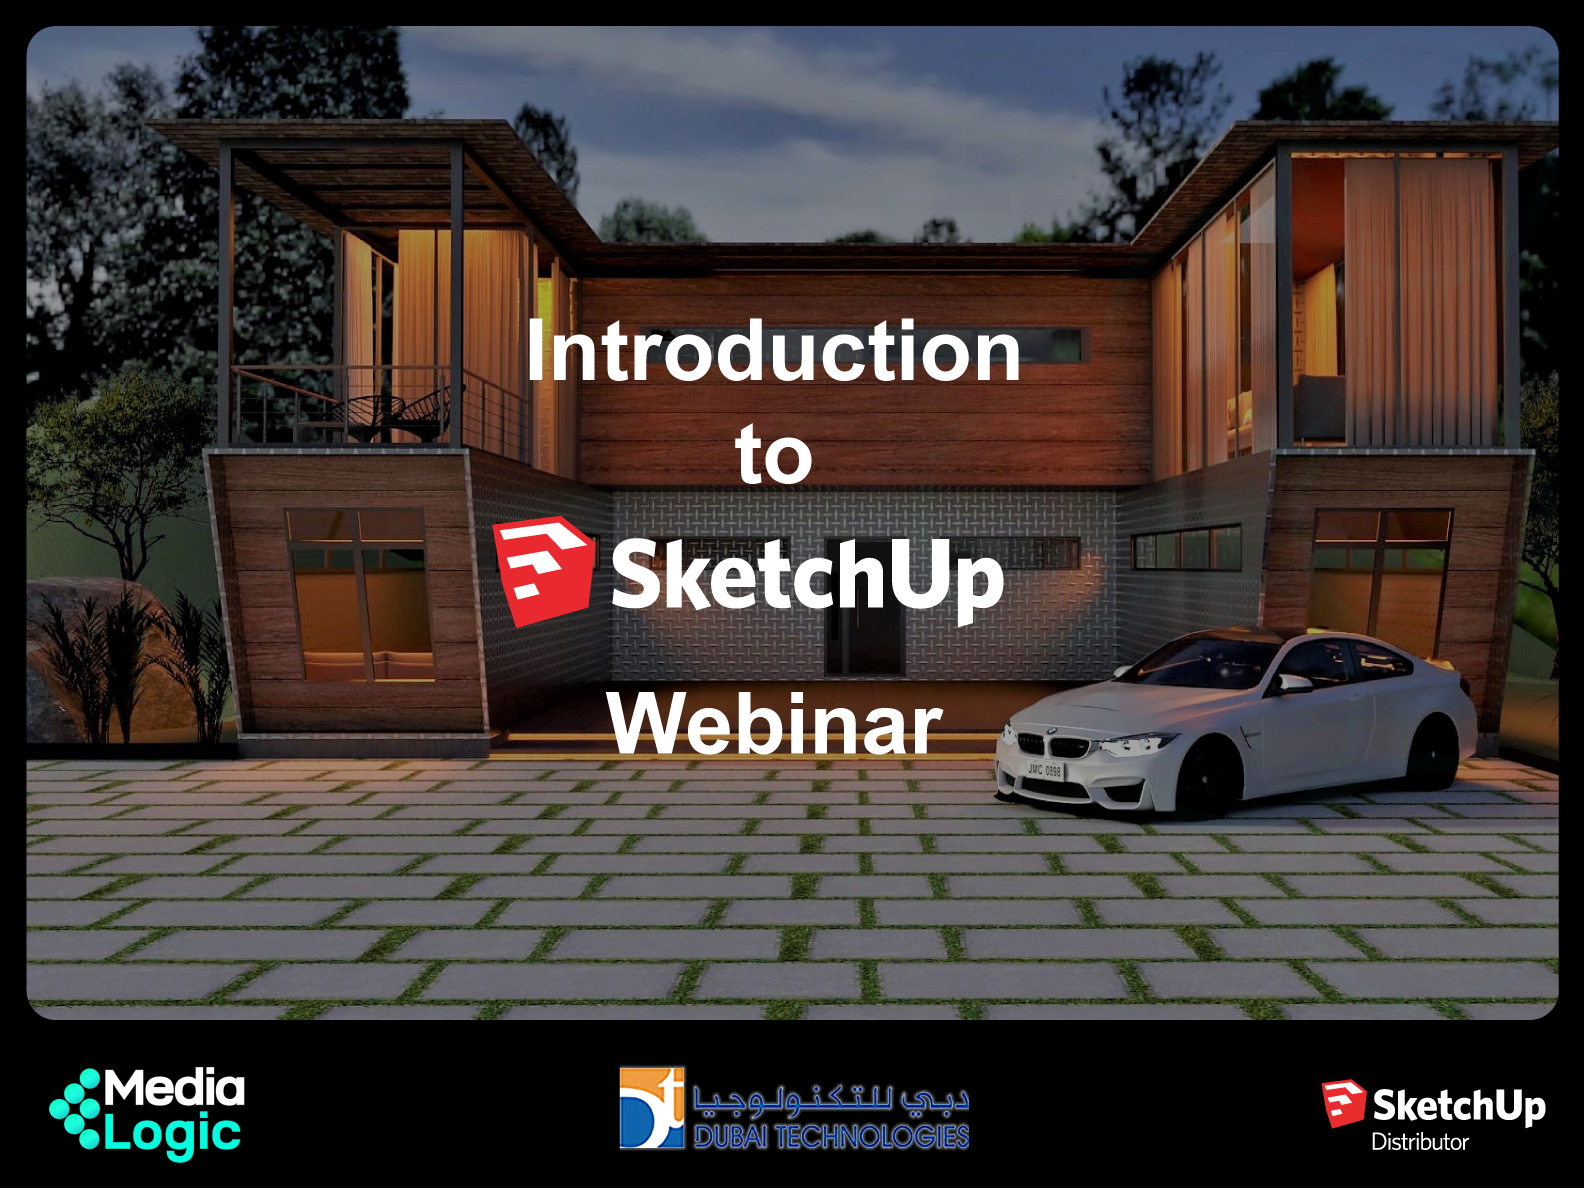 FREE WEBINAR: Introduction to SketchUp